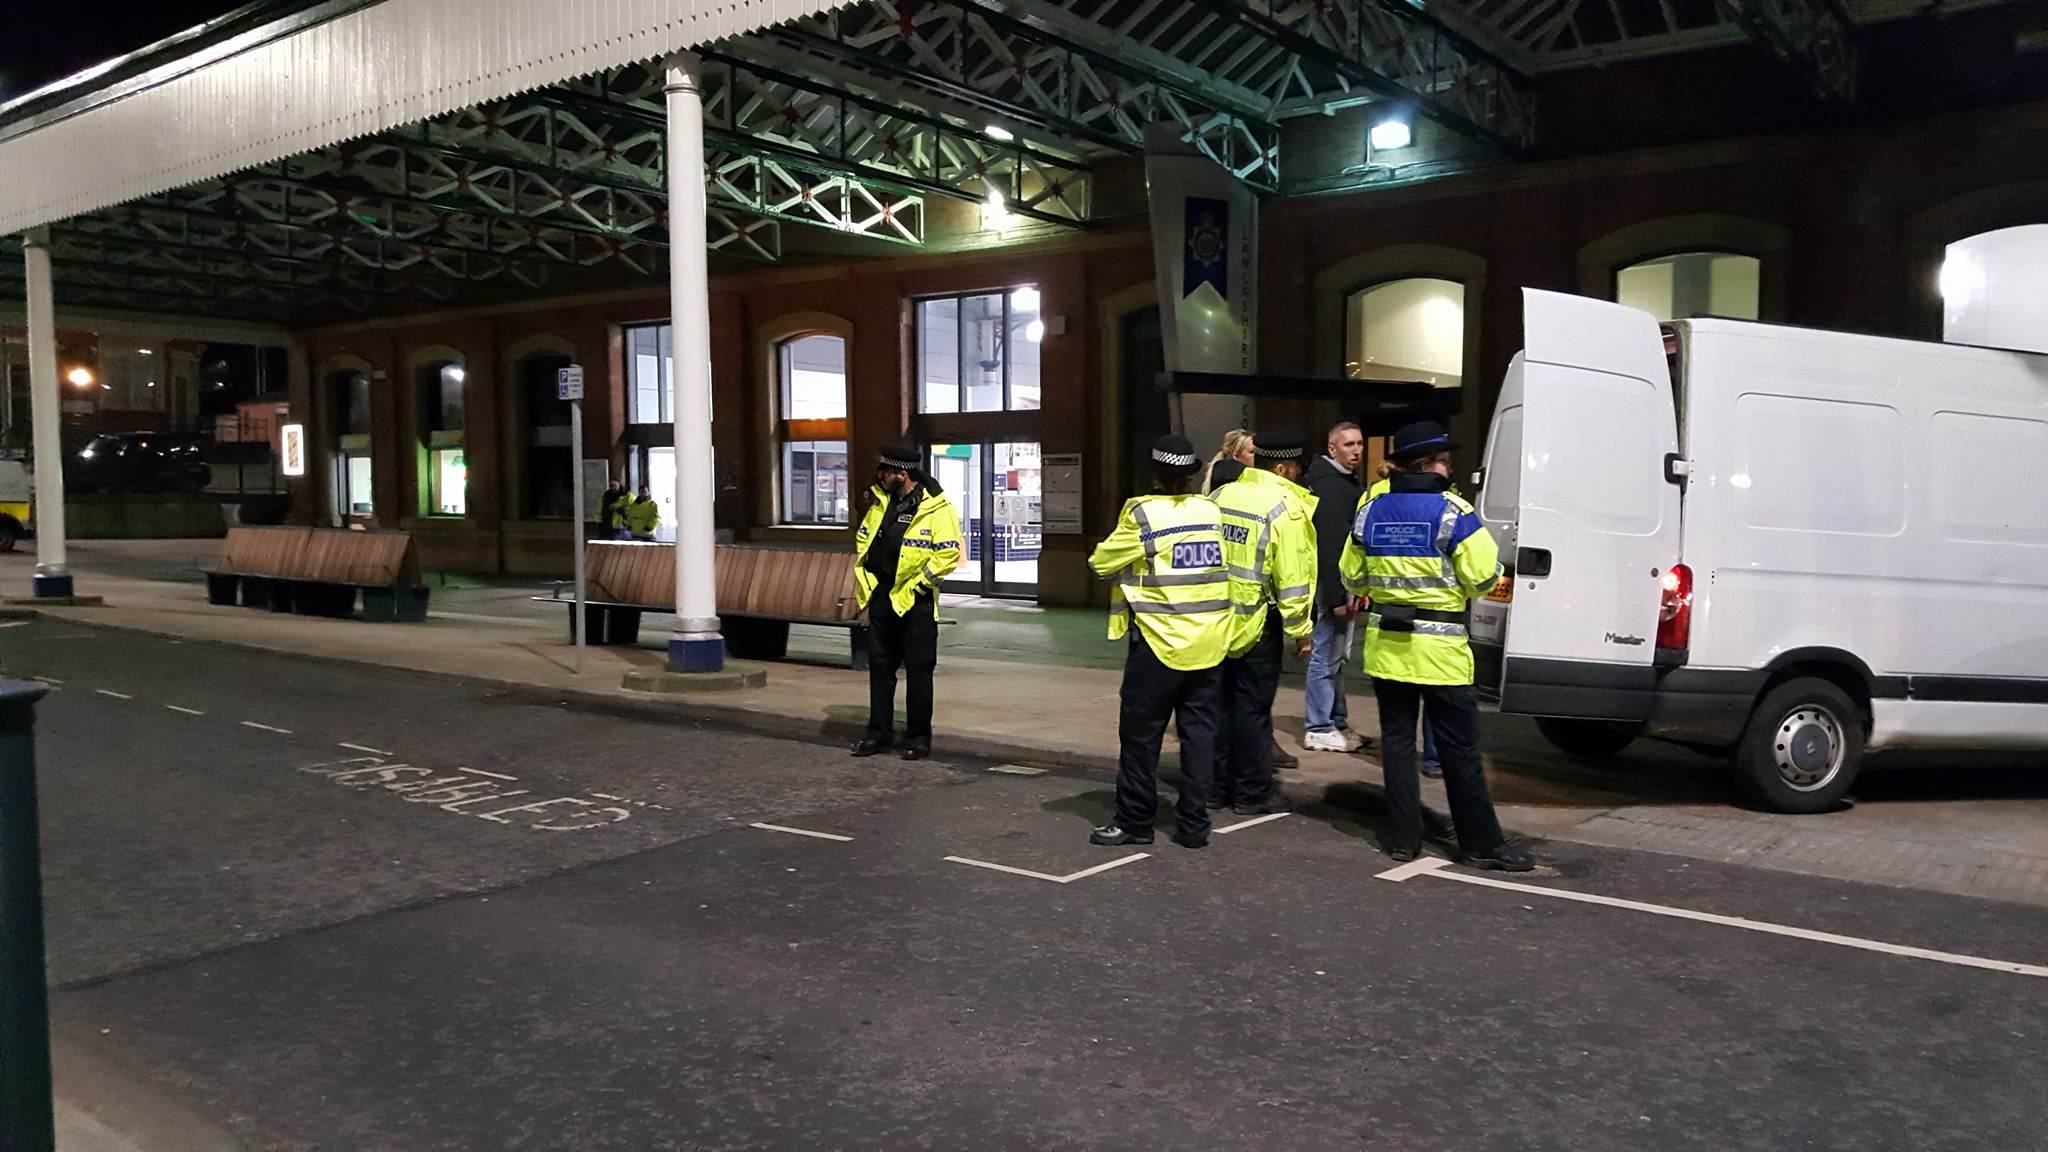 Spot checks carried out on drivers in Blackburn town centre - immigration officials also present